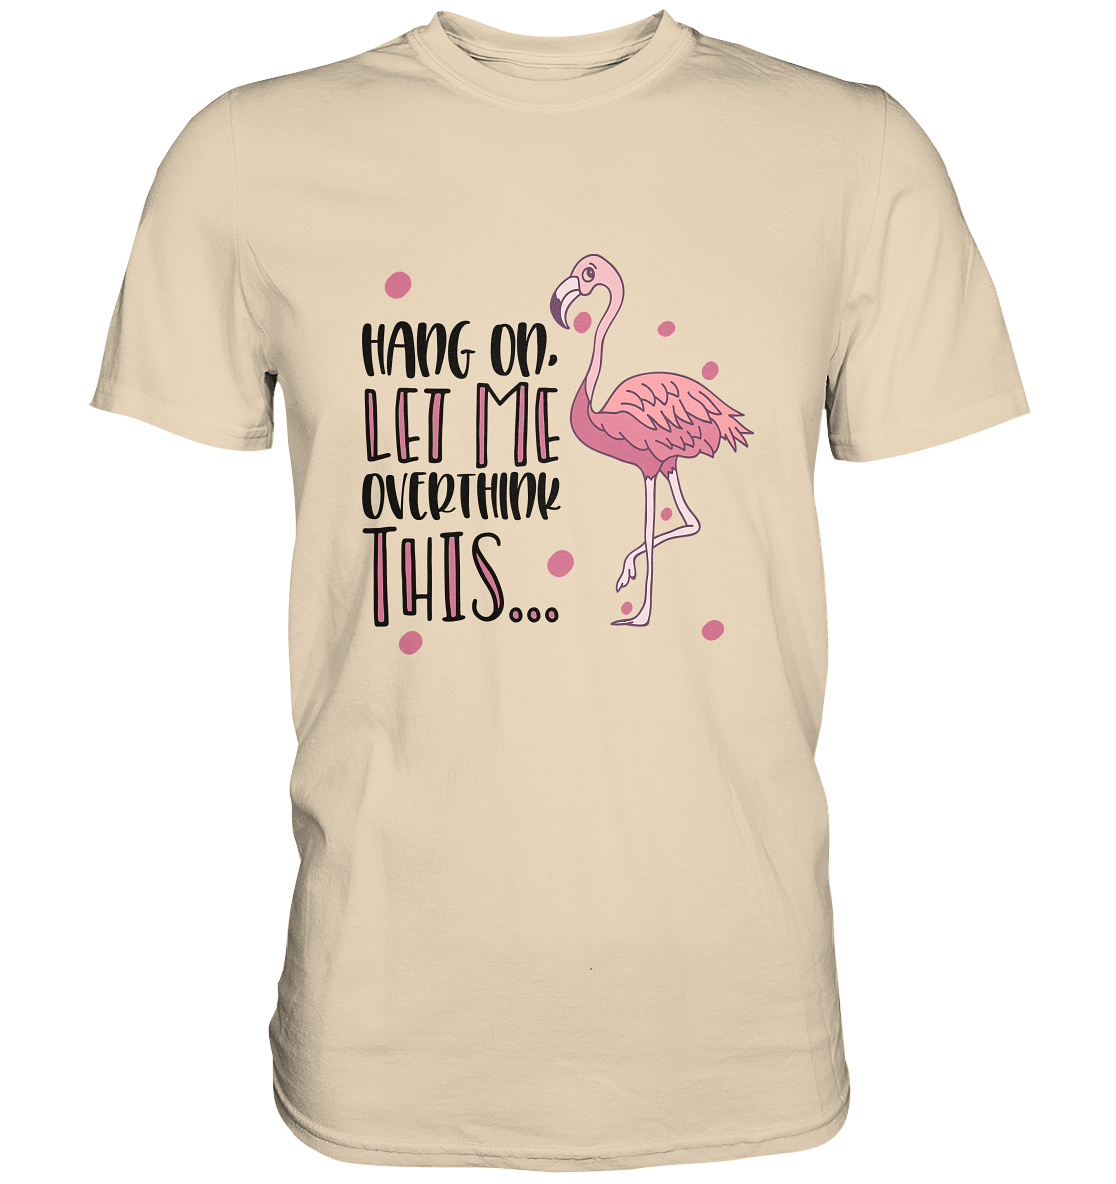 Hang on flamingo. Let´s overthink this. - Premium Shirt